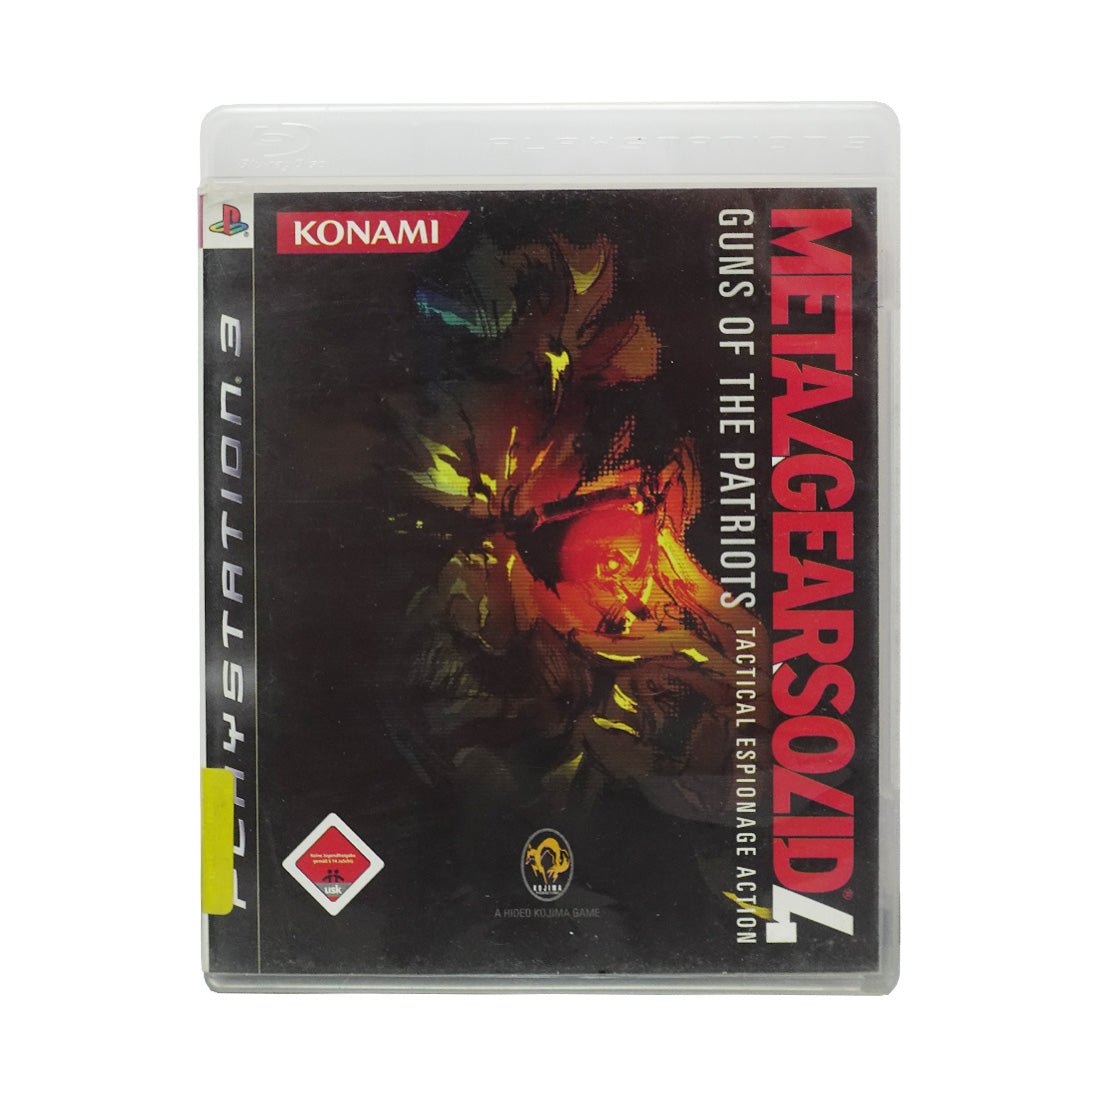 (Pre-Owned) Metal Gear Solid: Guns of the Patriots - PlayStation 3 - ريترو - Store 974 | ستور ٩٧٤